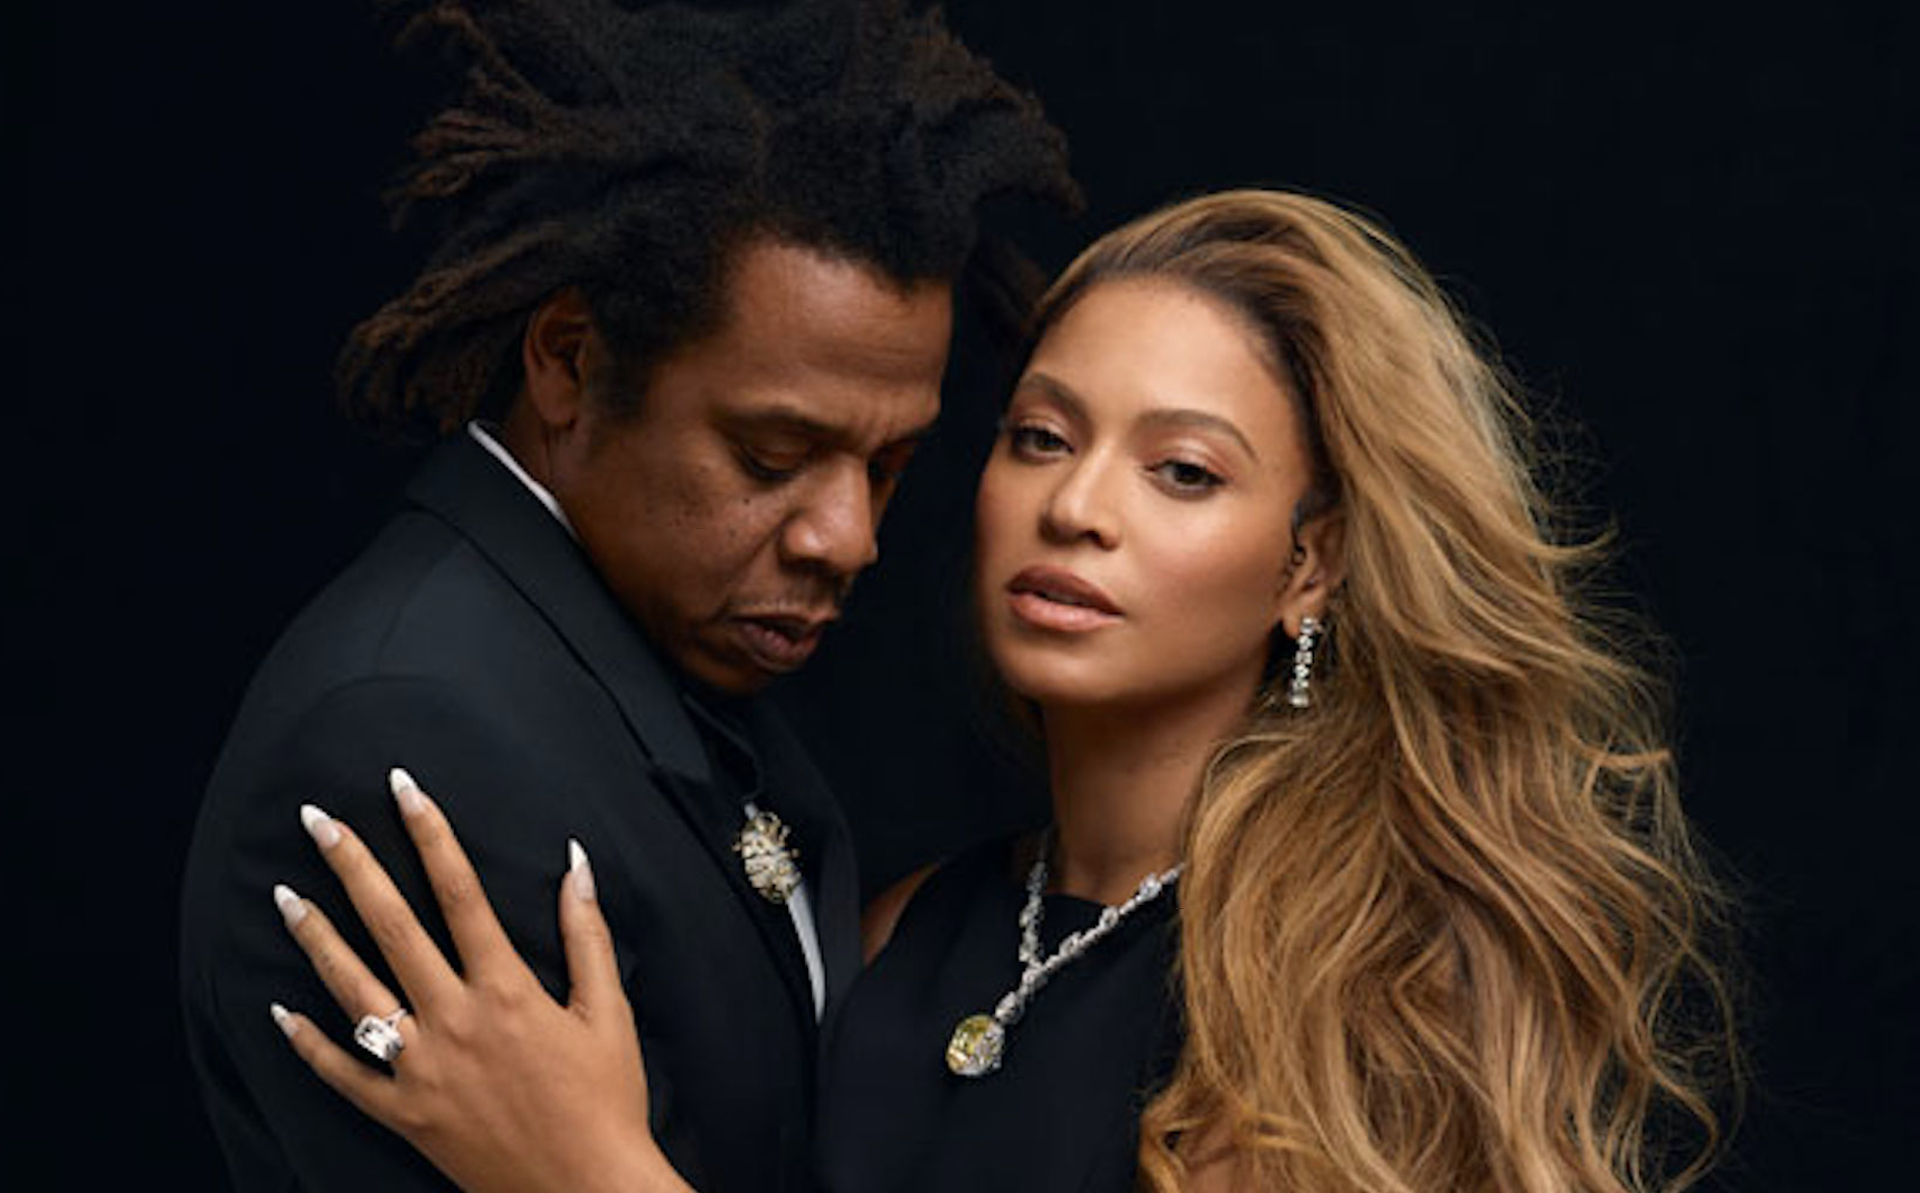 Nominations for the 2023 Grammy Awards are officially released. With her nine nominations this year, Beyonce is tied with her husband, Jay-Z, for most Grammy nominations of all time. Both artists have received 88 nominations in their music careers.